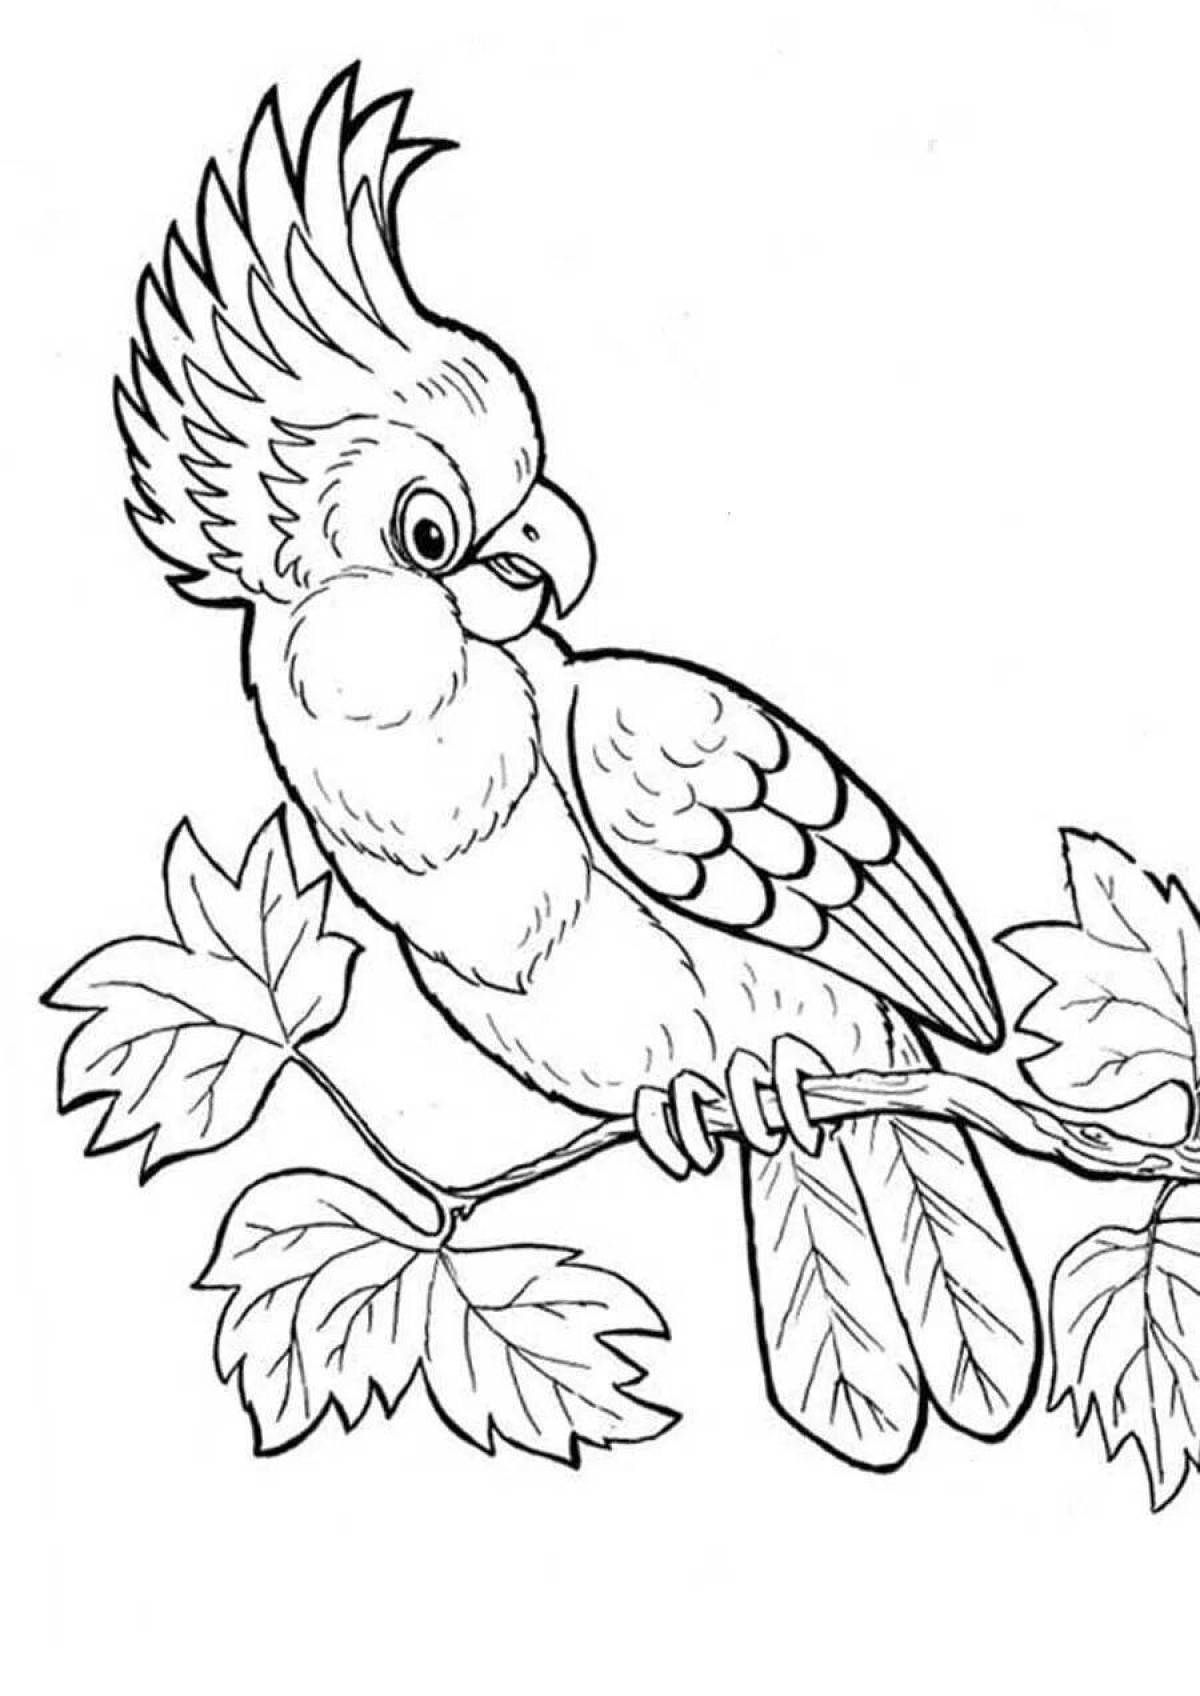 Coloring book shiny parrot for children 6-7 years old